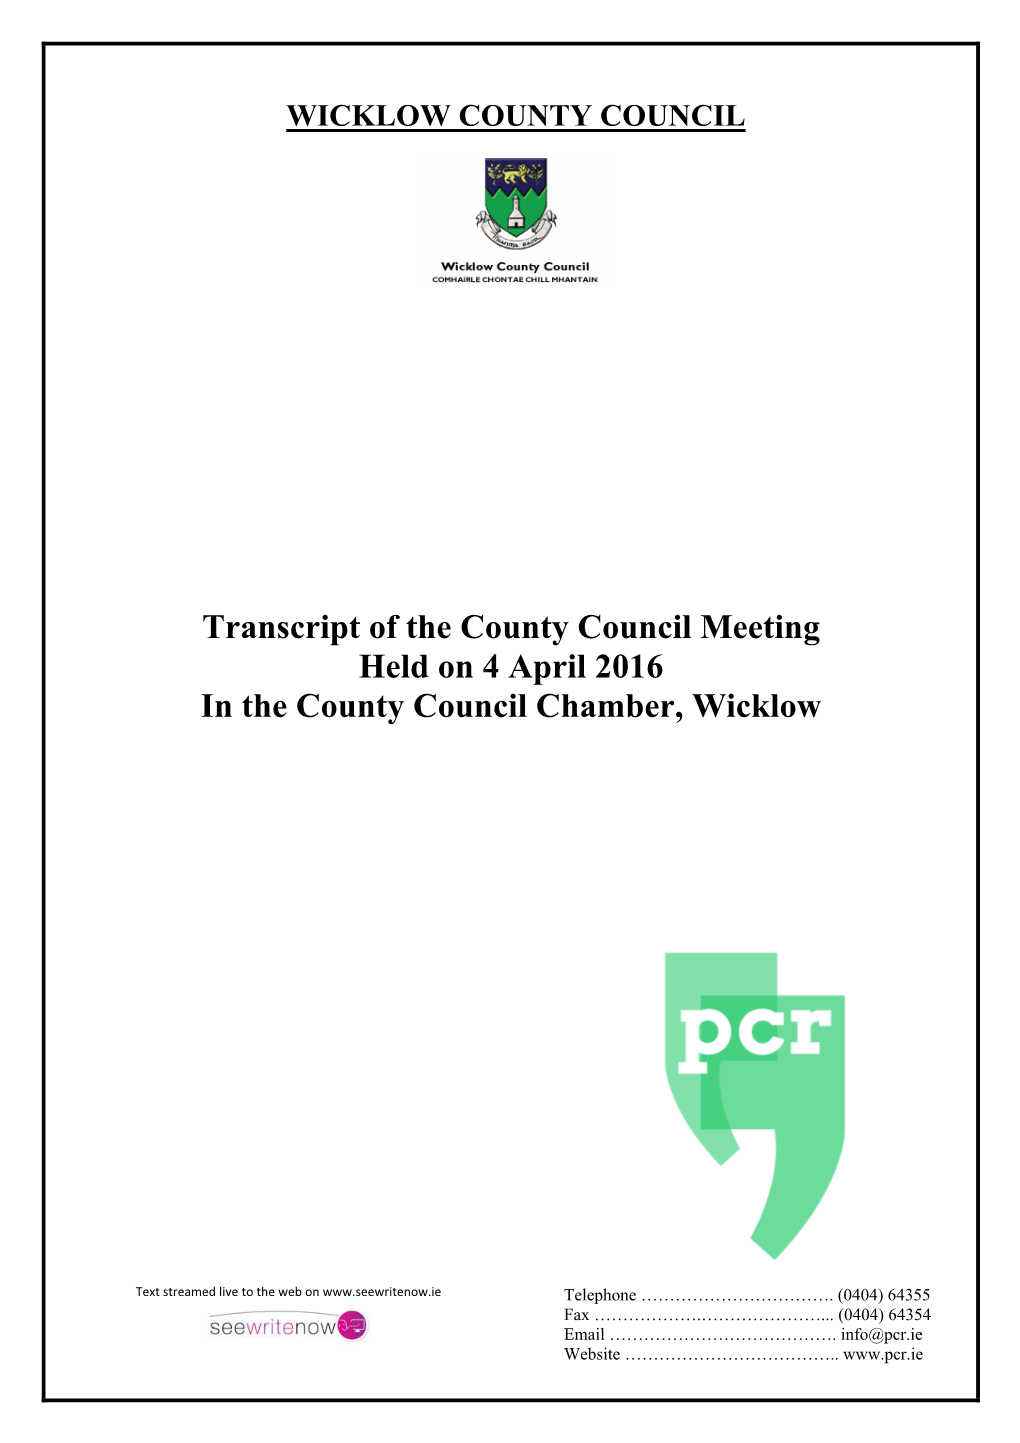 Transcript of the County Council Meeting Held on 4 April 2016 in the County Council Chamber, Wicklow